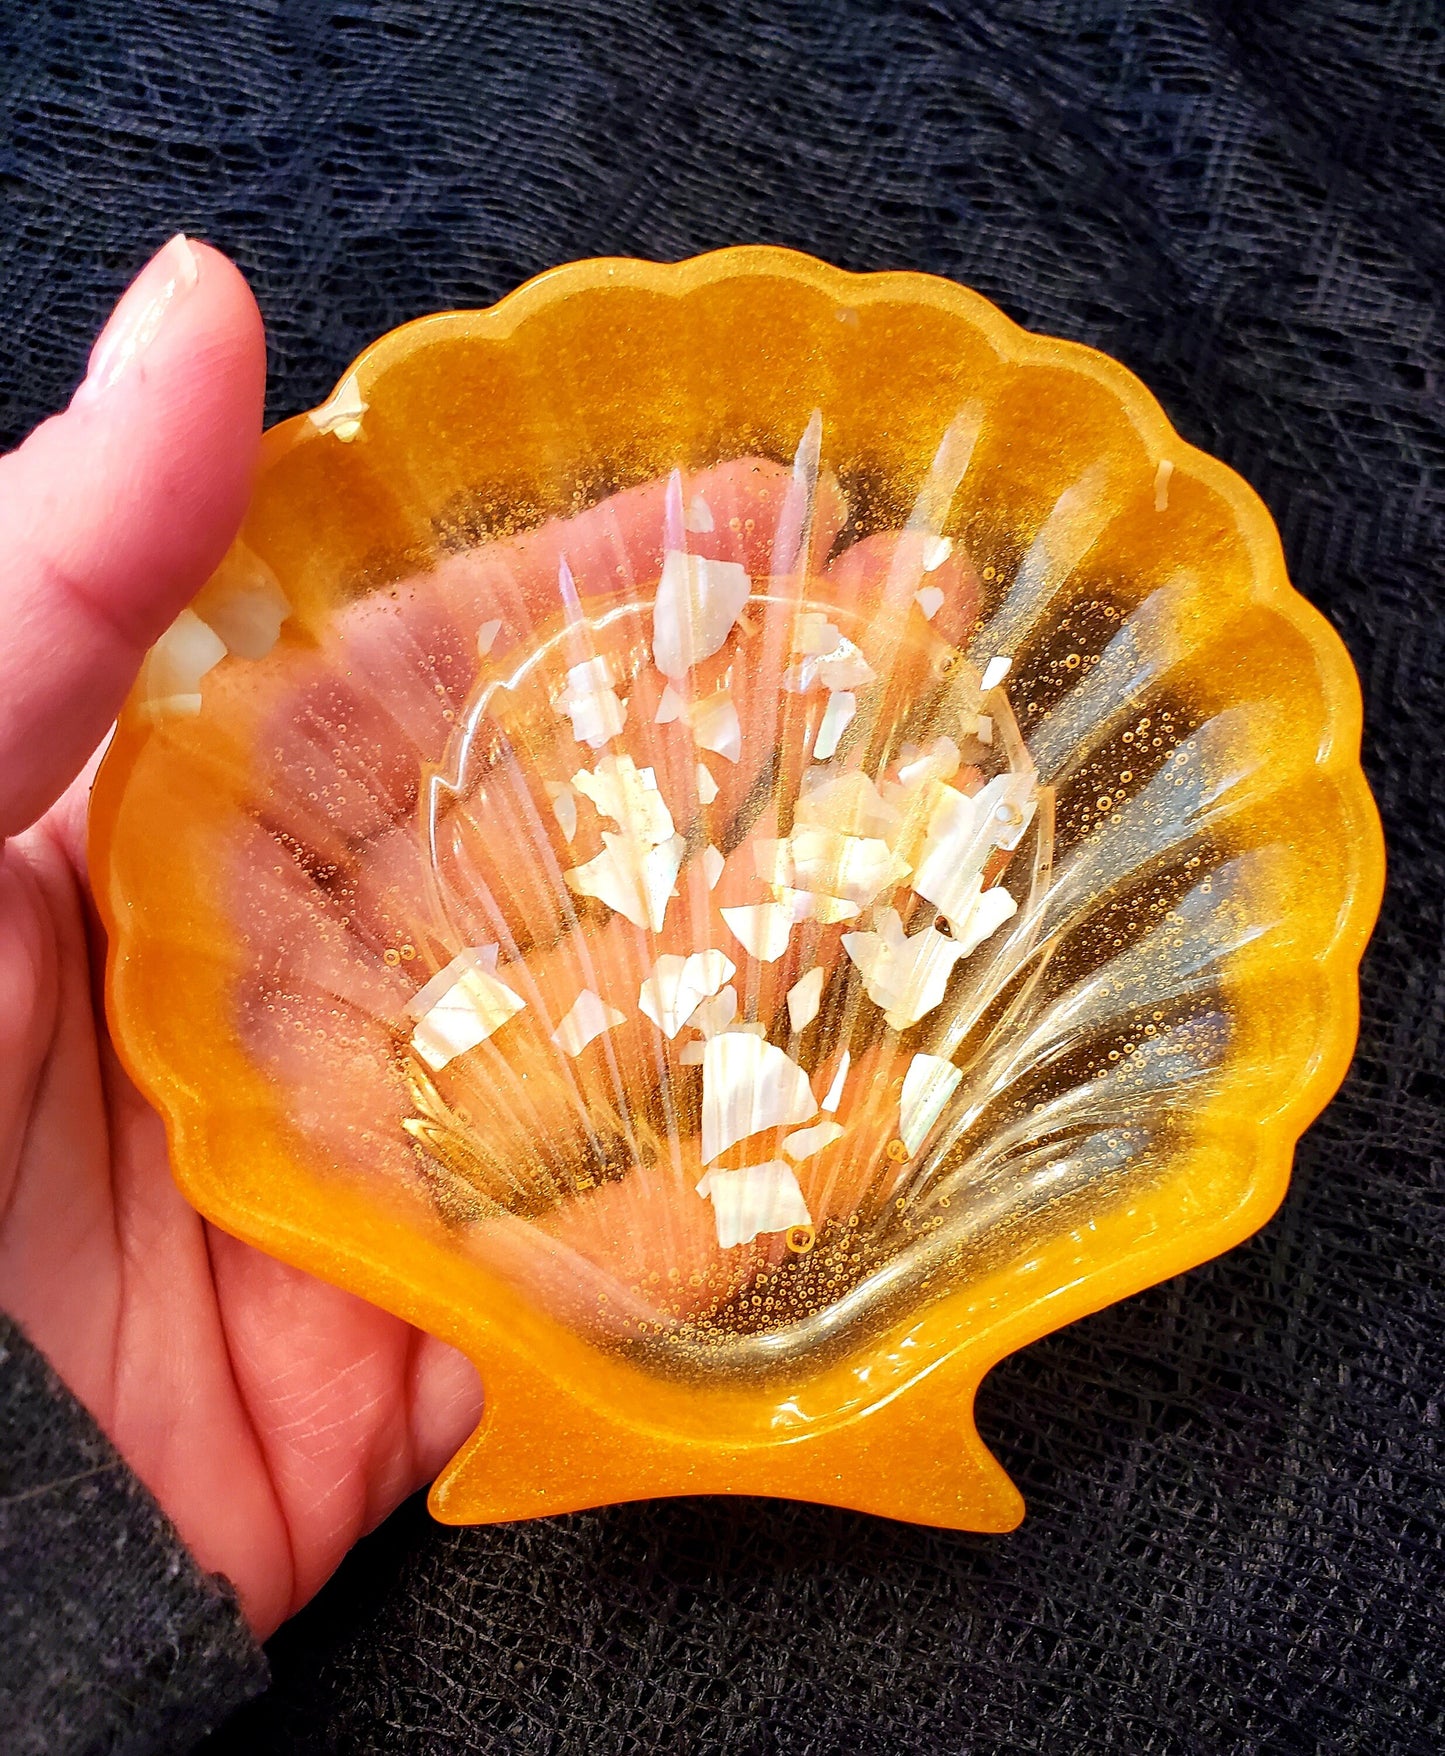 Shell Jewelry Dish *Various Designs and Colors*